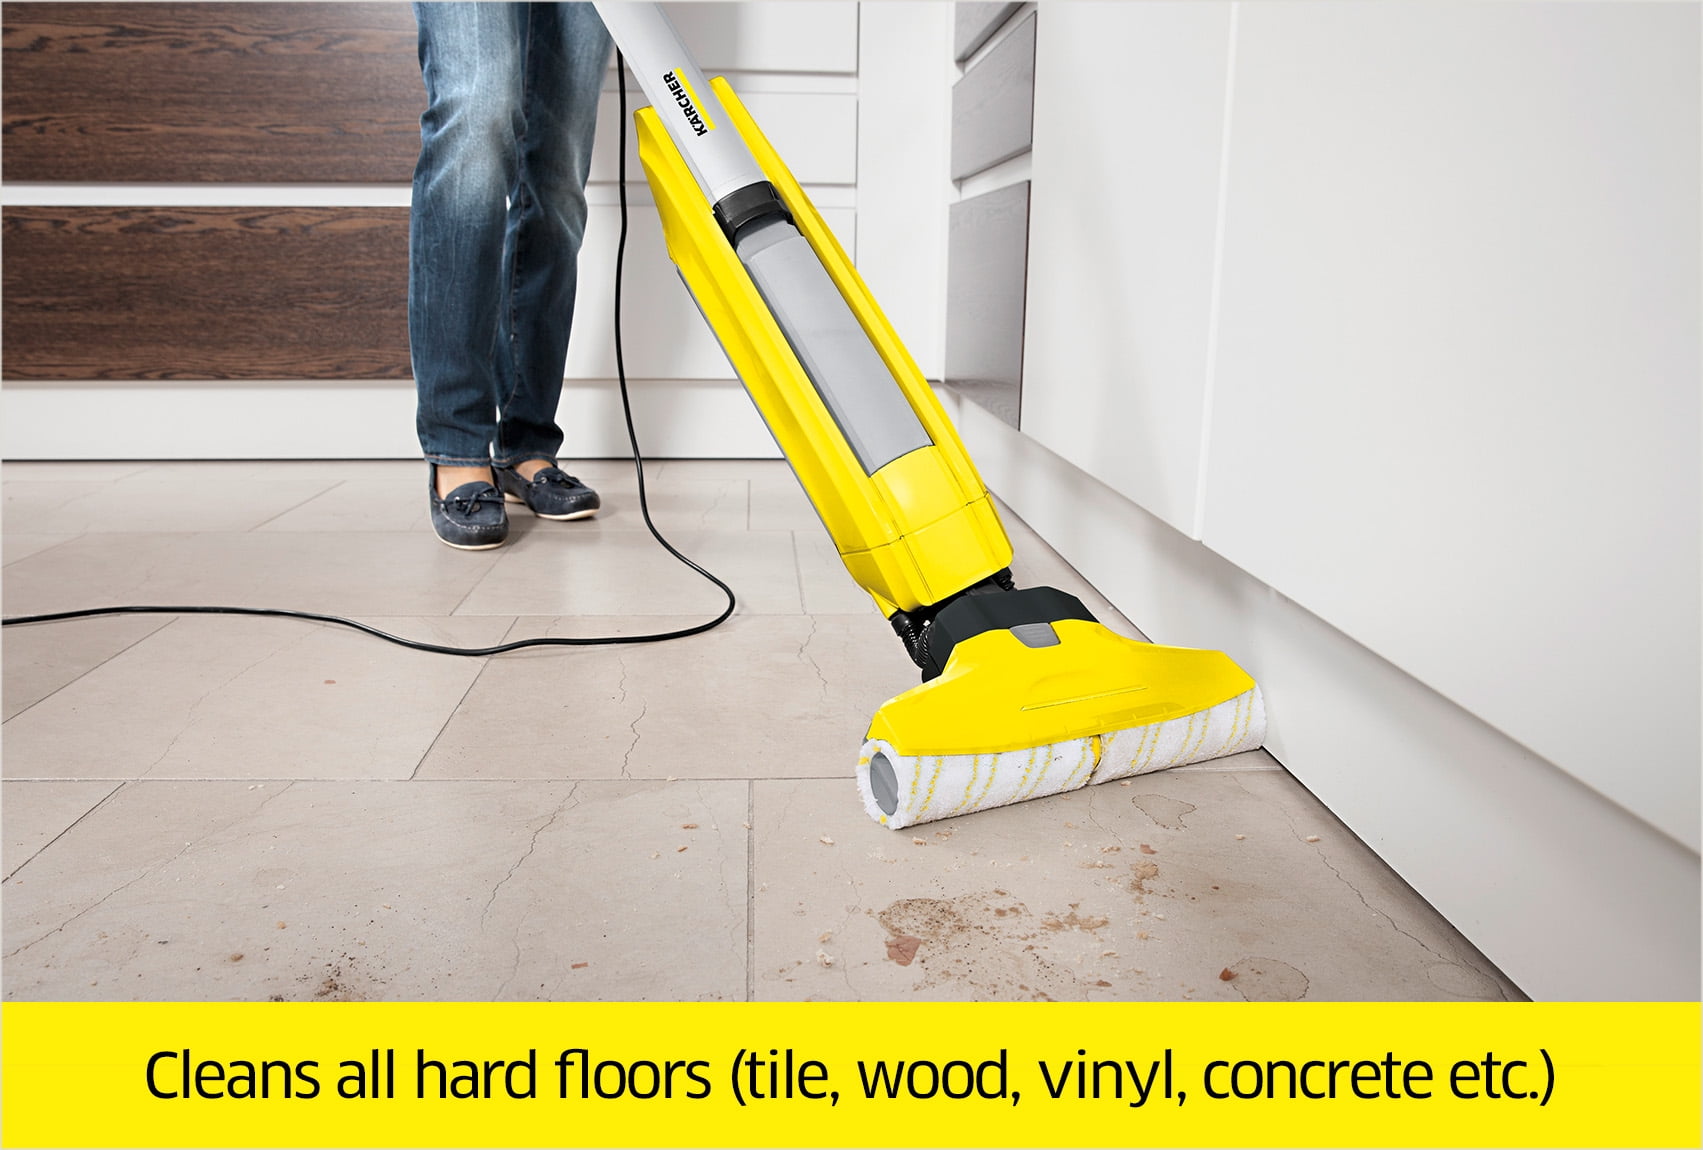 Karcher FC 5 450W Corded Bagless Upright Floor Cleaner - Yellow